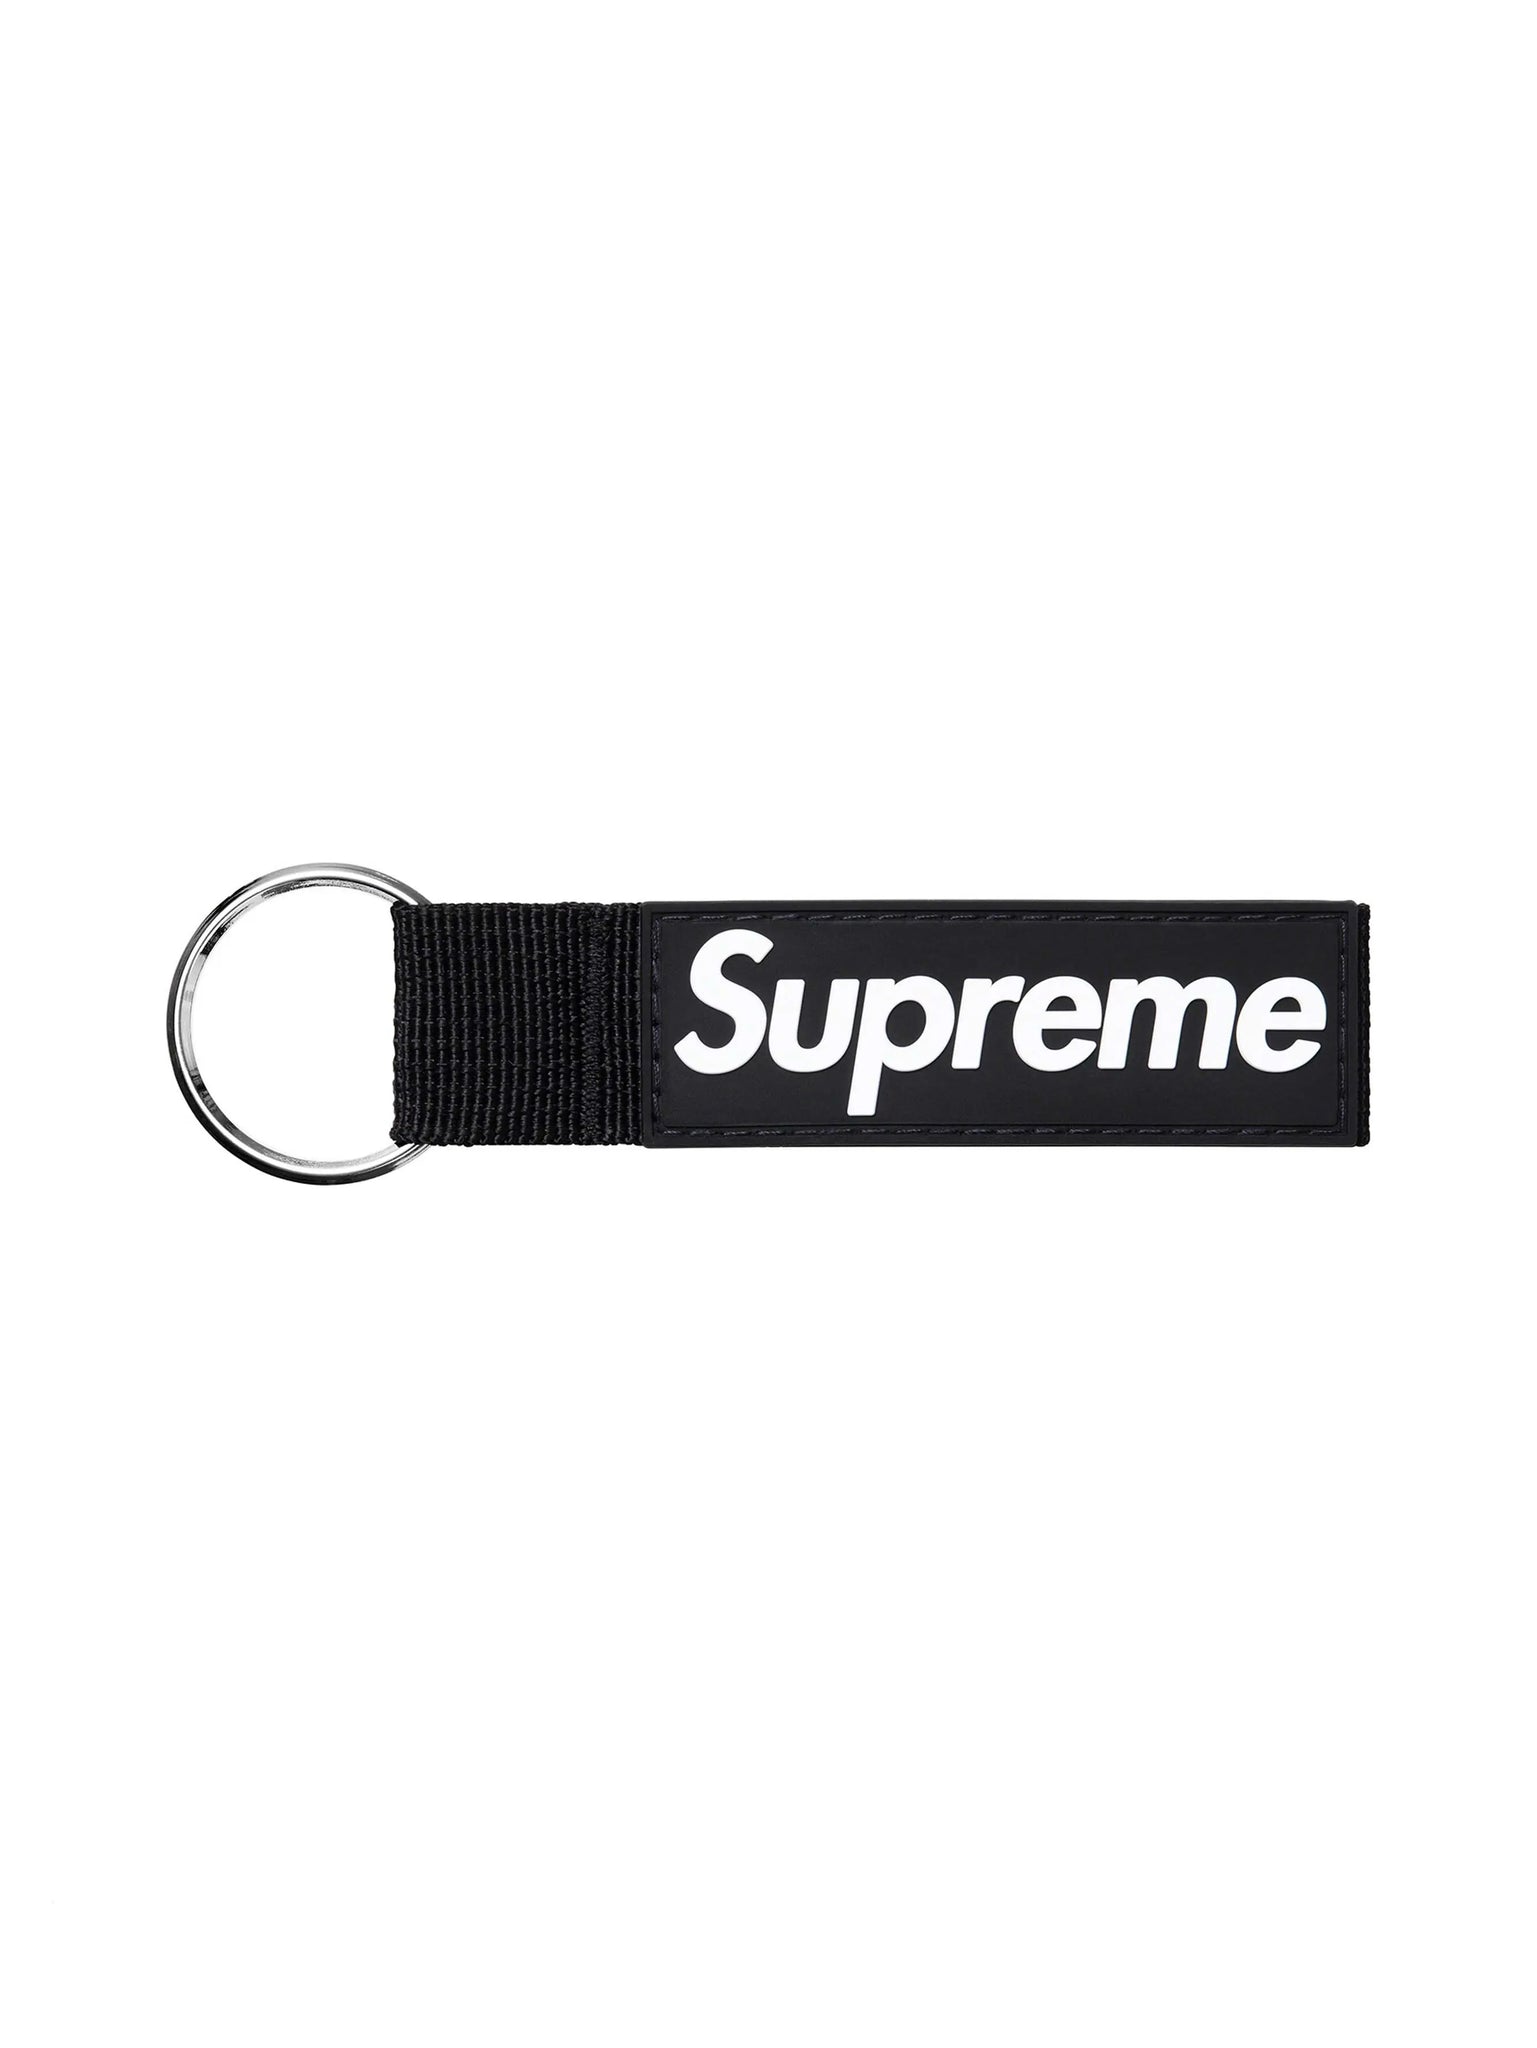 Supreme Webbing Keychain Black in Auckland, New Zealand - Shop name